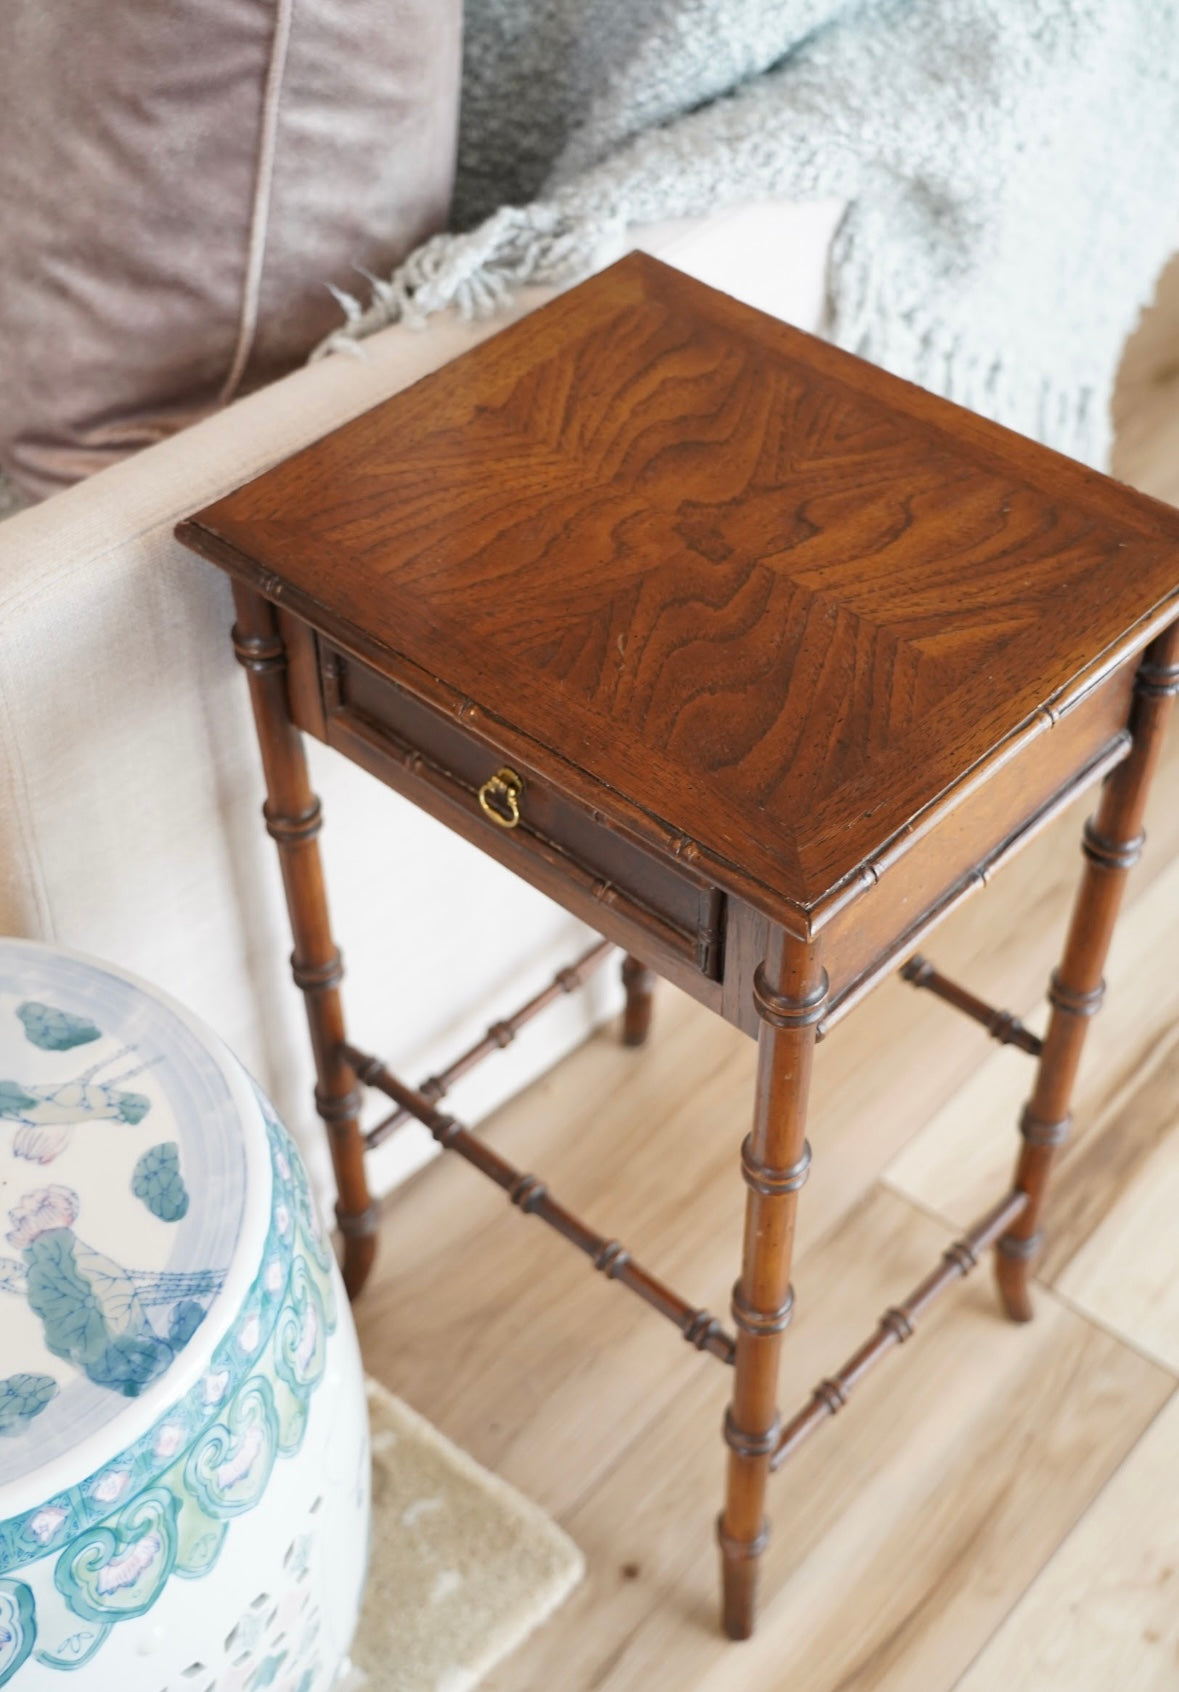 VINTAGE BAMBOO WOODEN SIDE TABLE